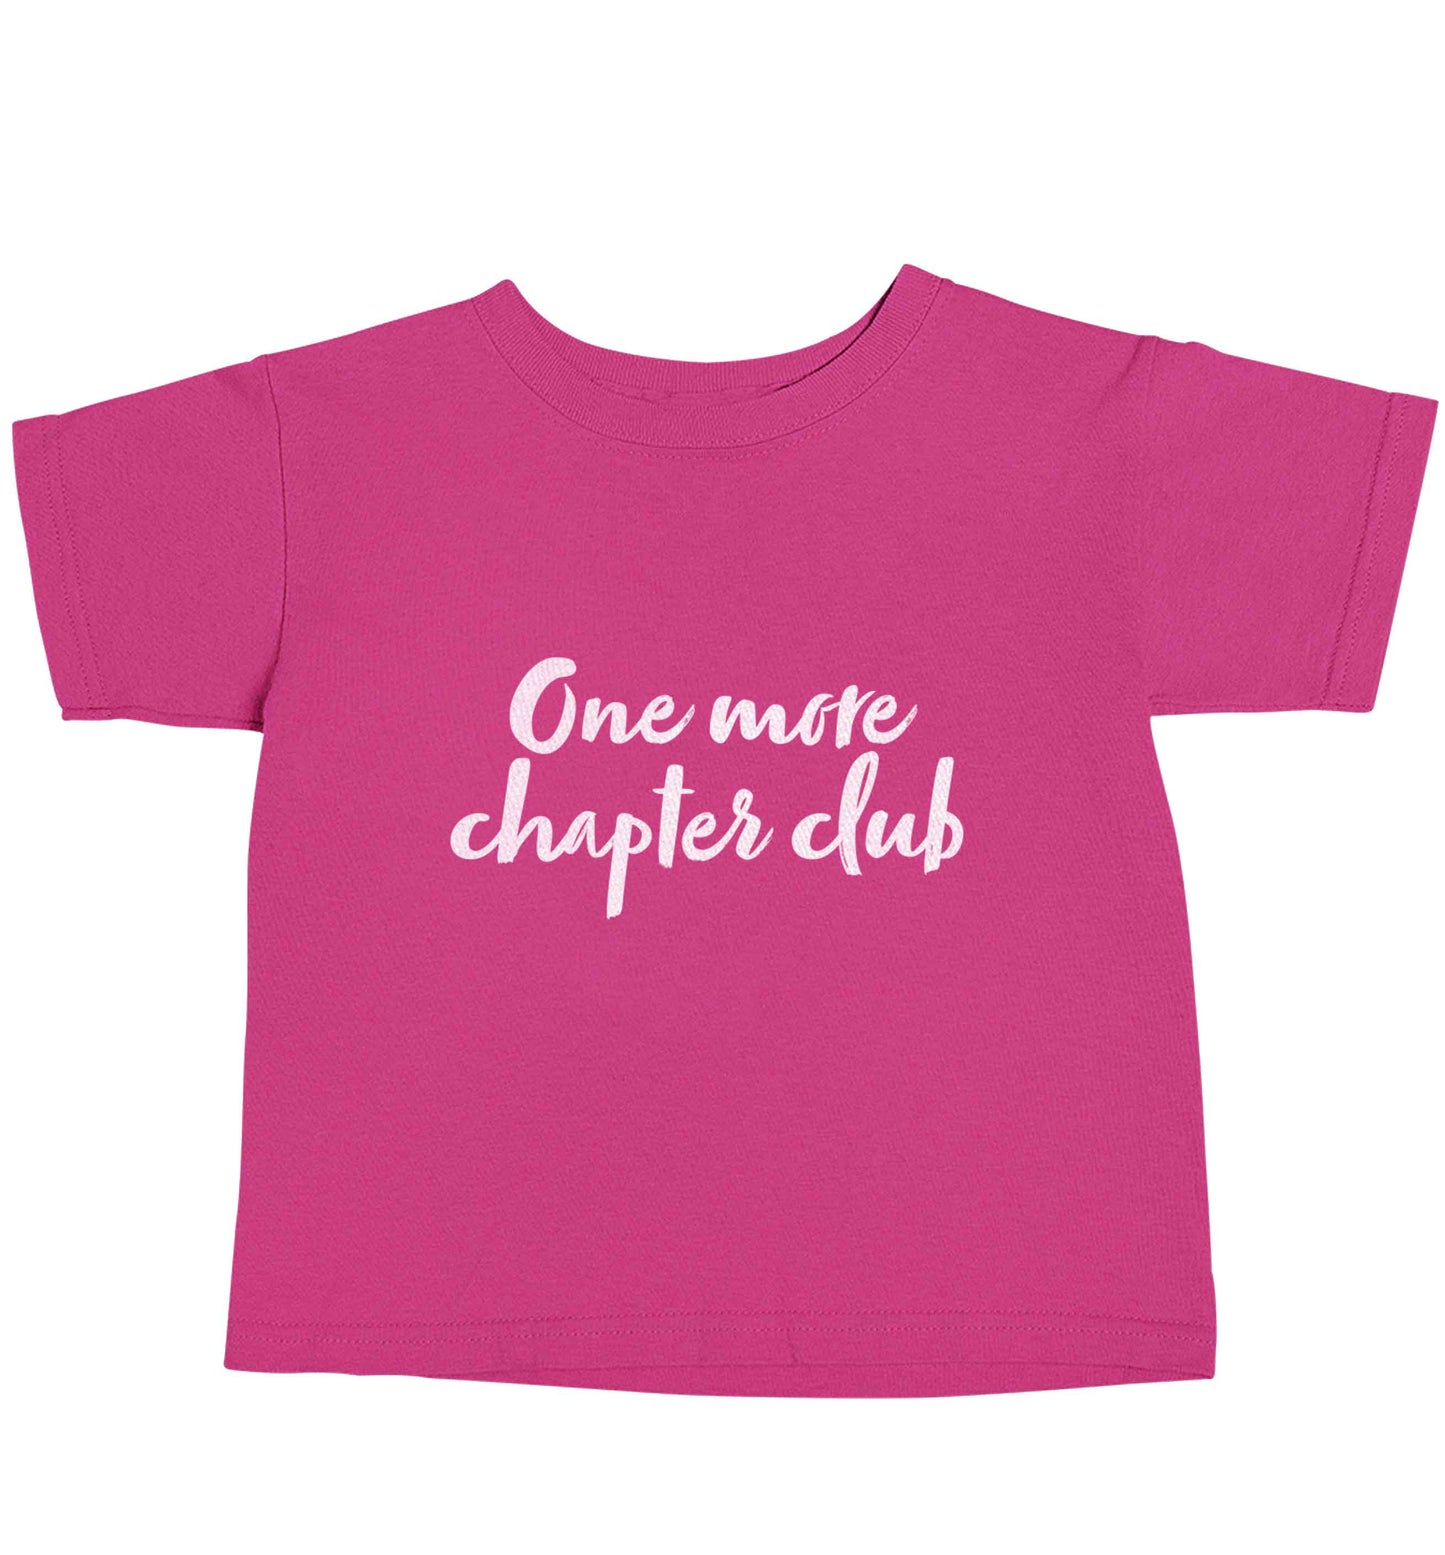 One more chapter club Kit pink baby toddler Tshirt 2 Years